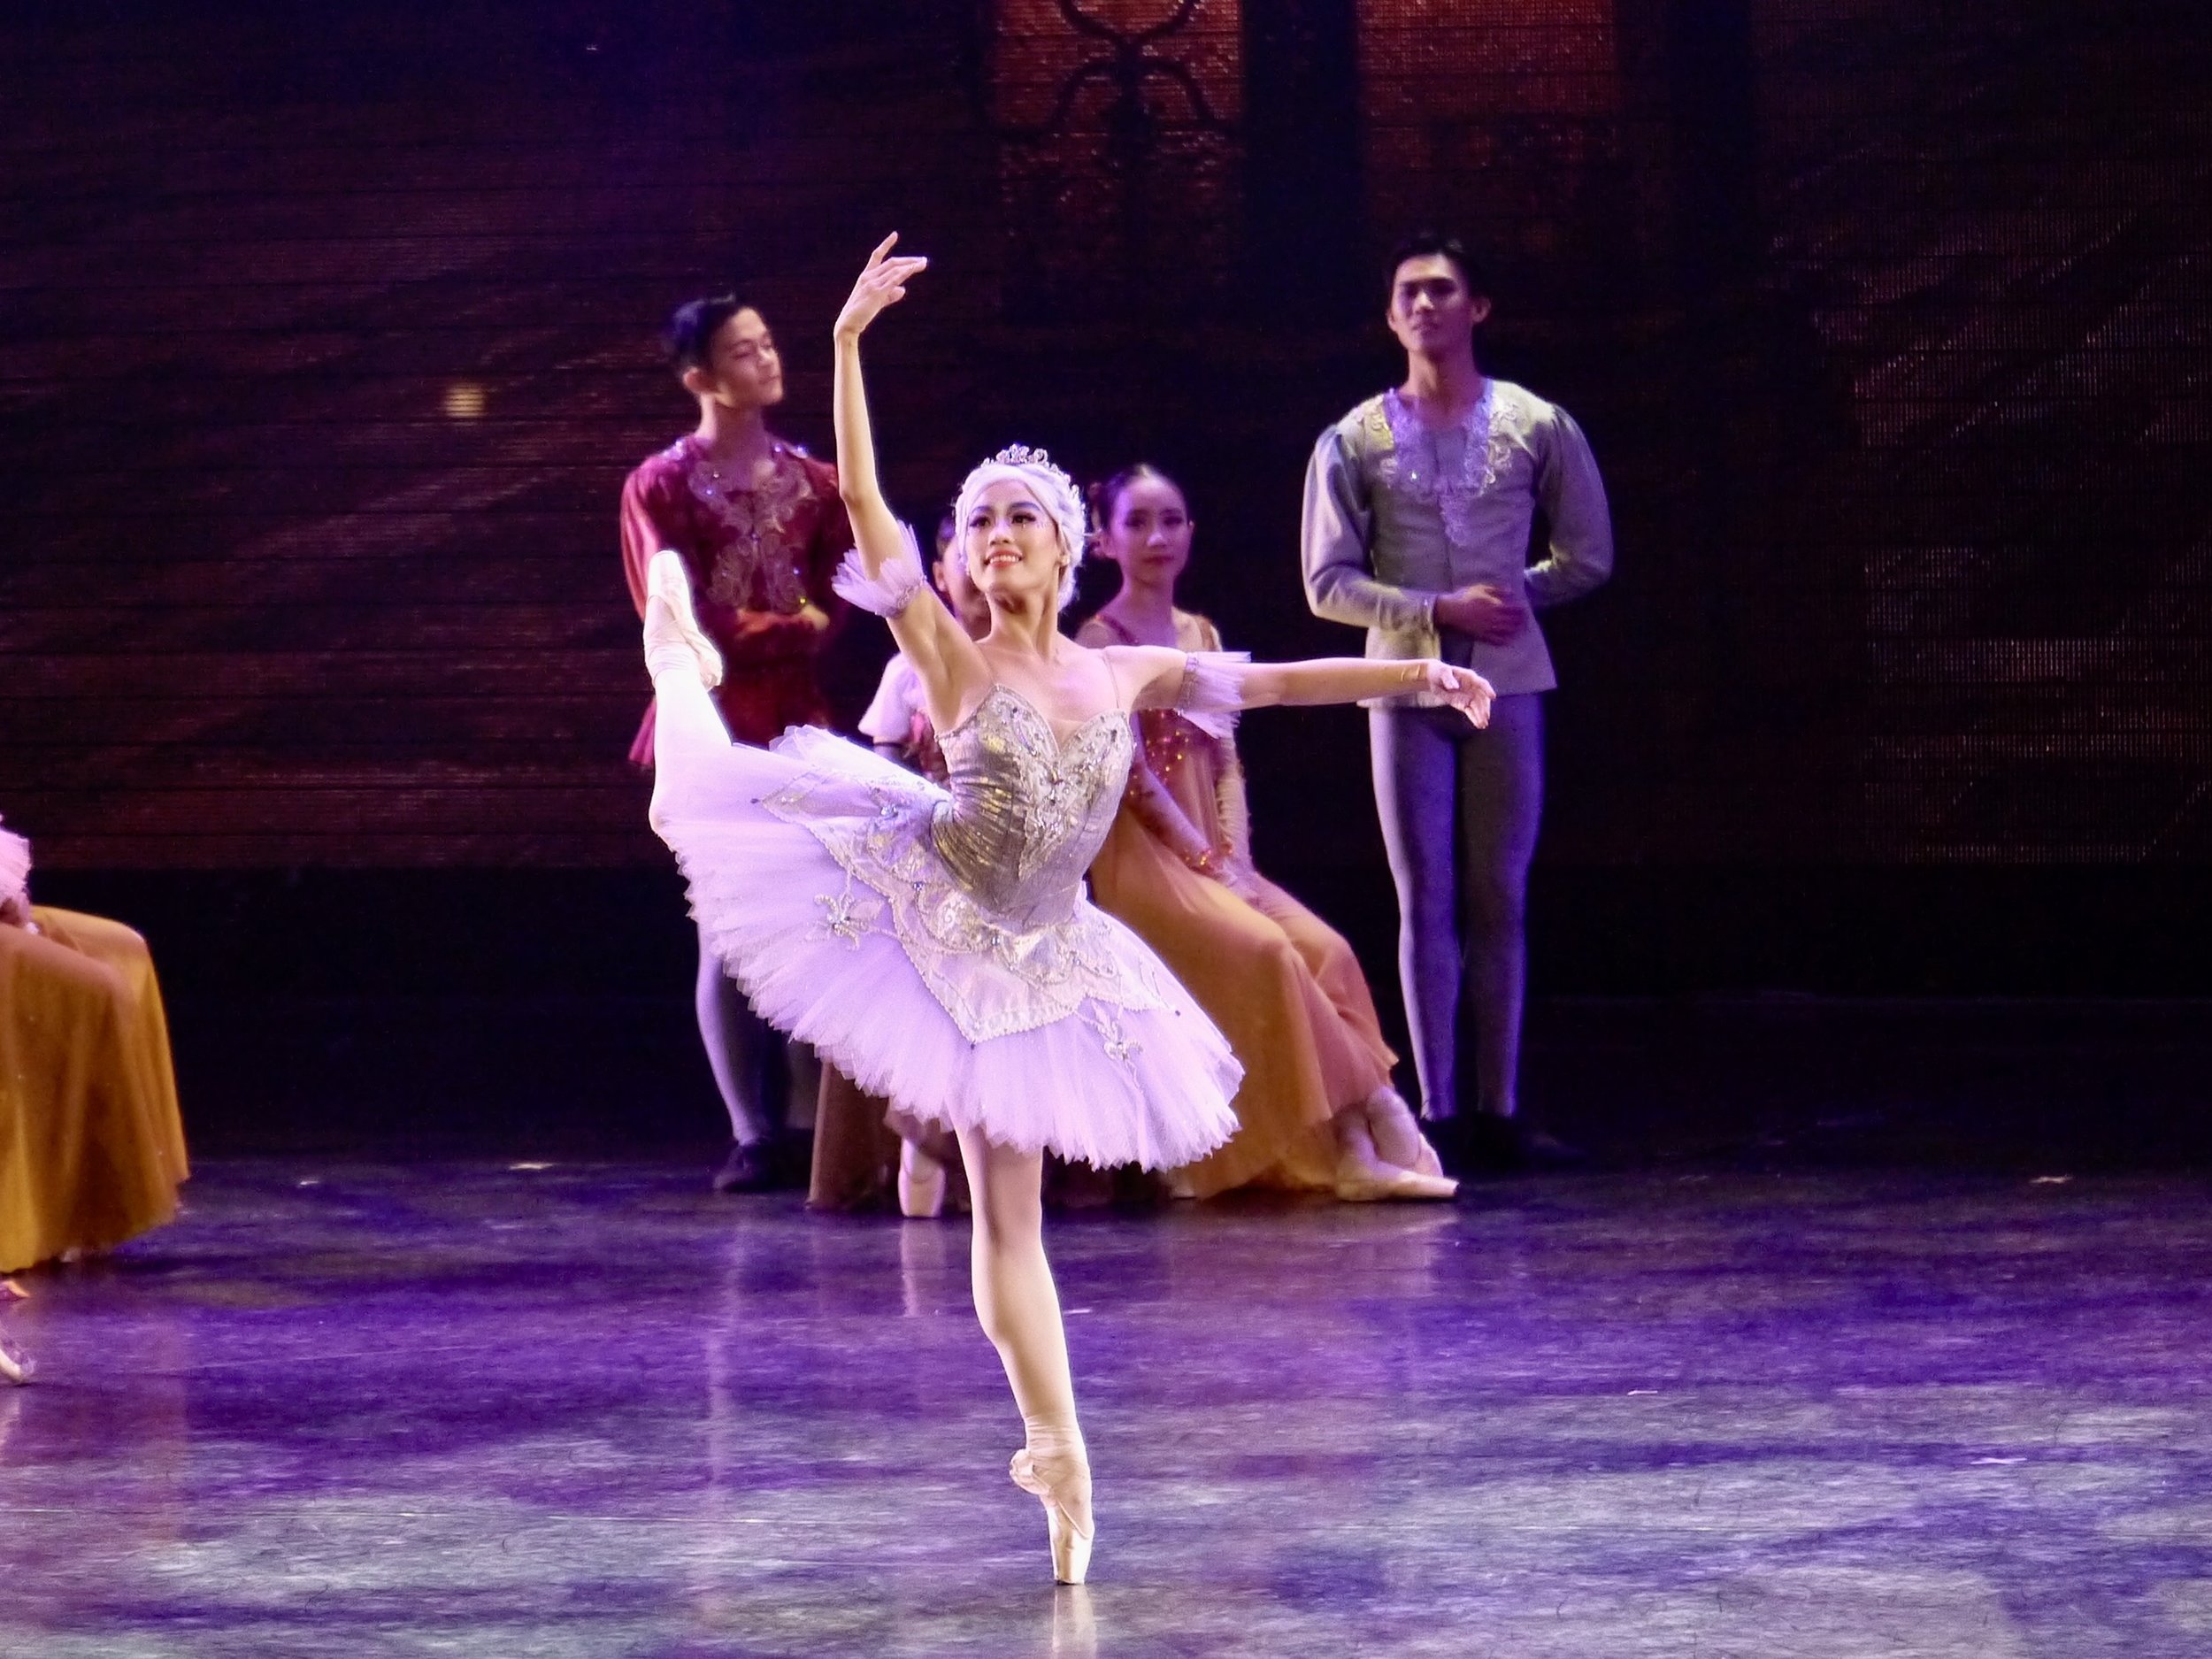    In Lisa Macuja-Elizalde’s  Sleeping Beauty,  Joan Emery Sia plays one of the benevolent fairies who offer gifts to Princess Aurora on her christening. Each fairy is represented by a color; Joan exudes exquisite grace in lilac. Photo by Giselle P. 